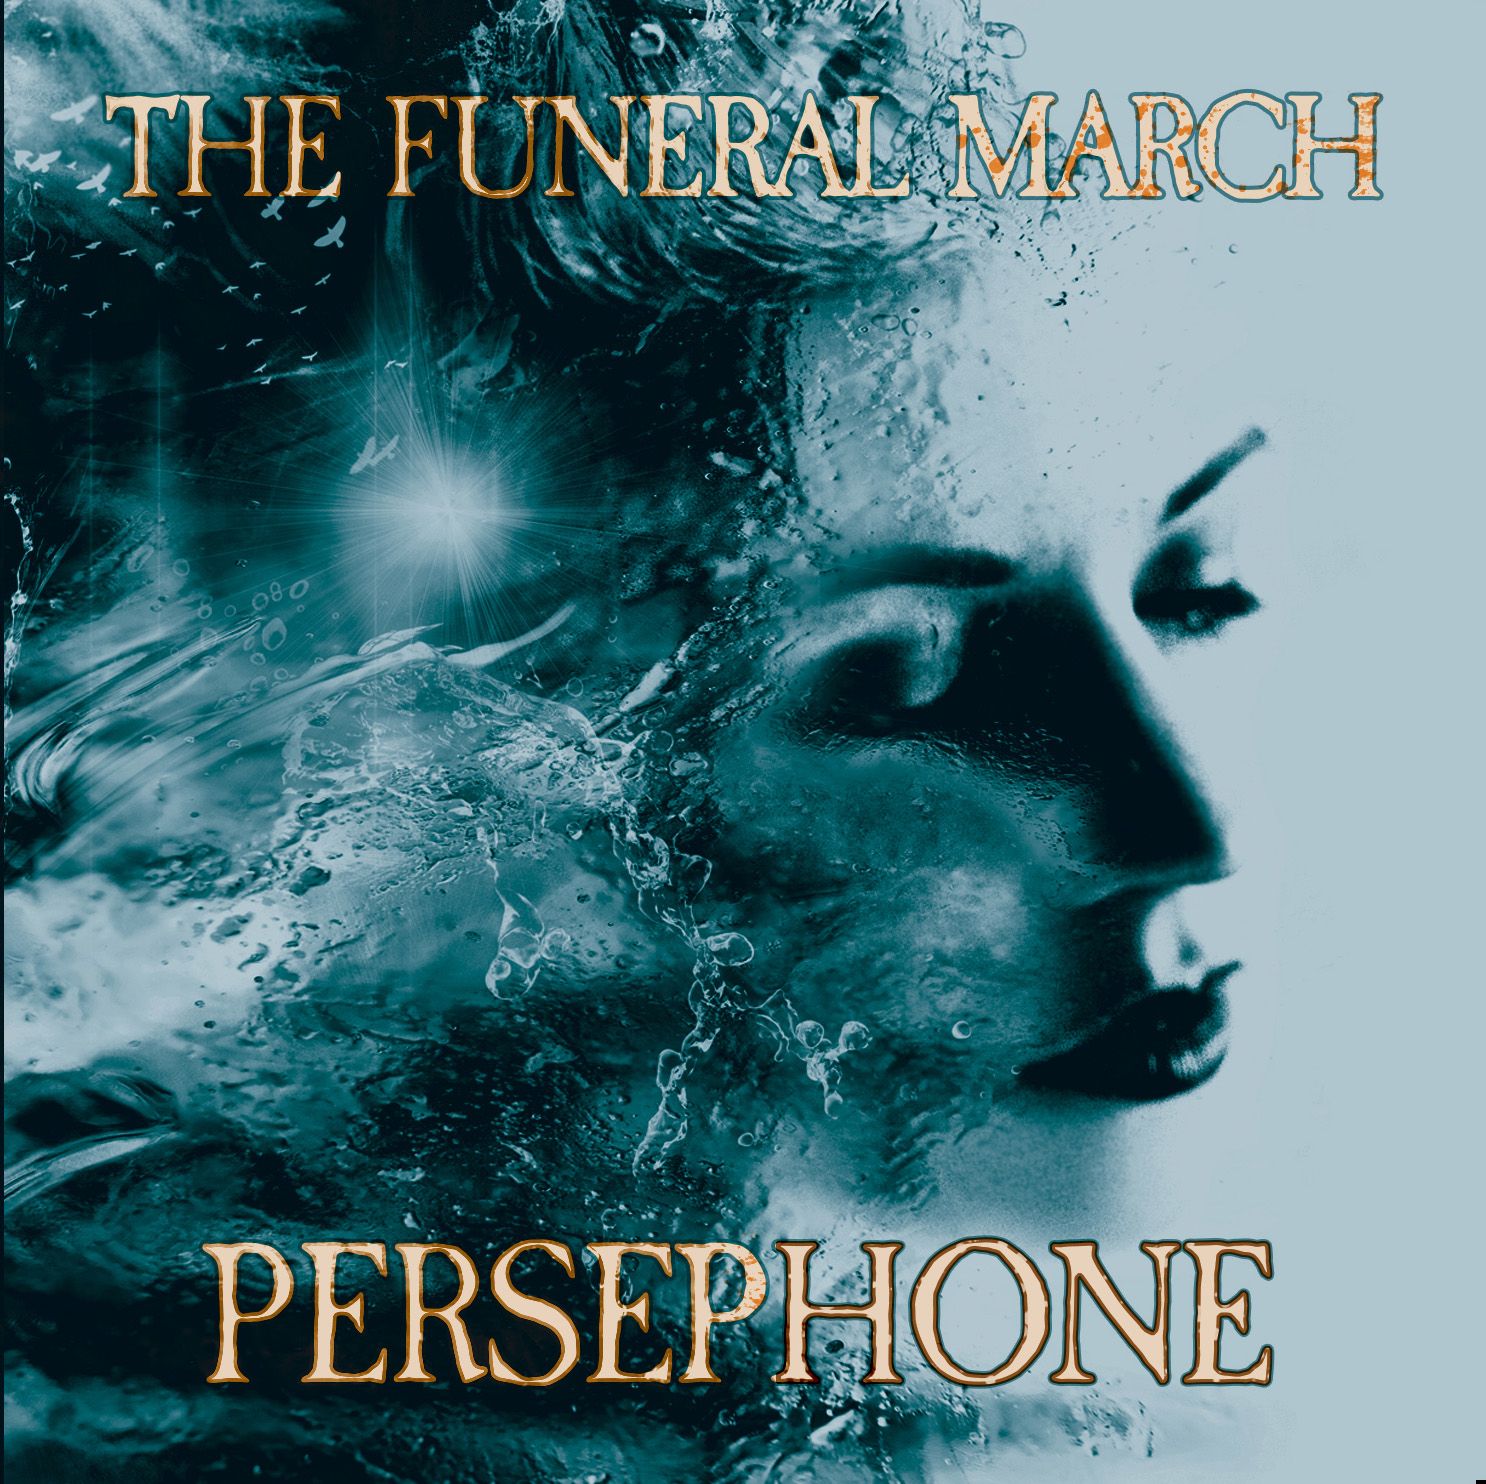 Listen Now: Funeral March Releases Mythology-Inspired EP